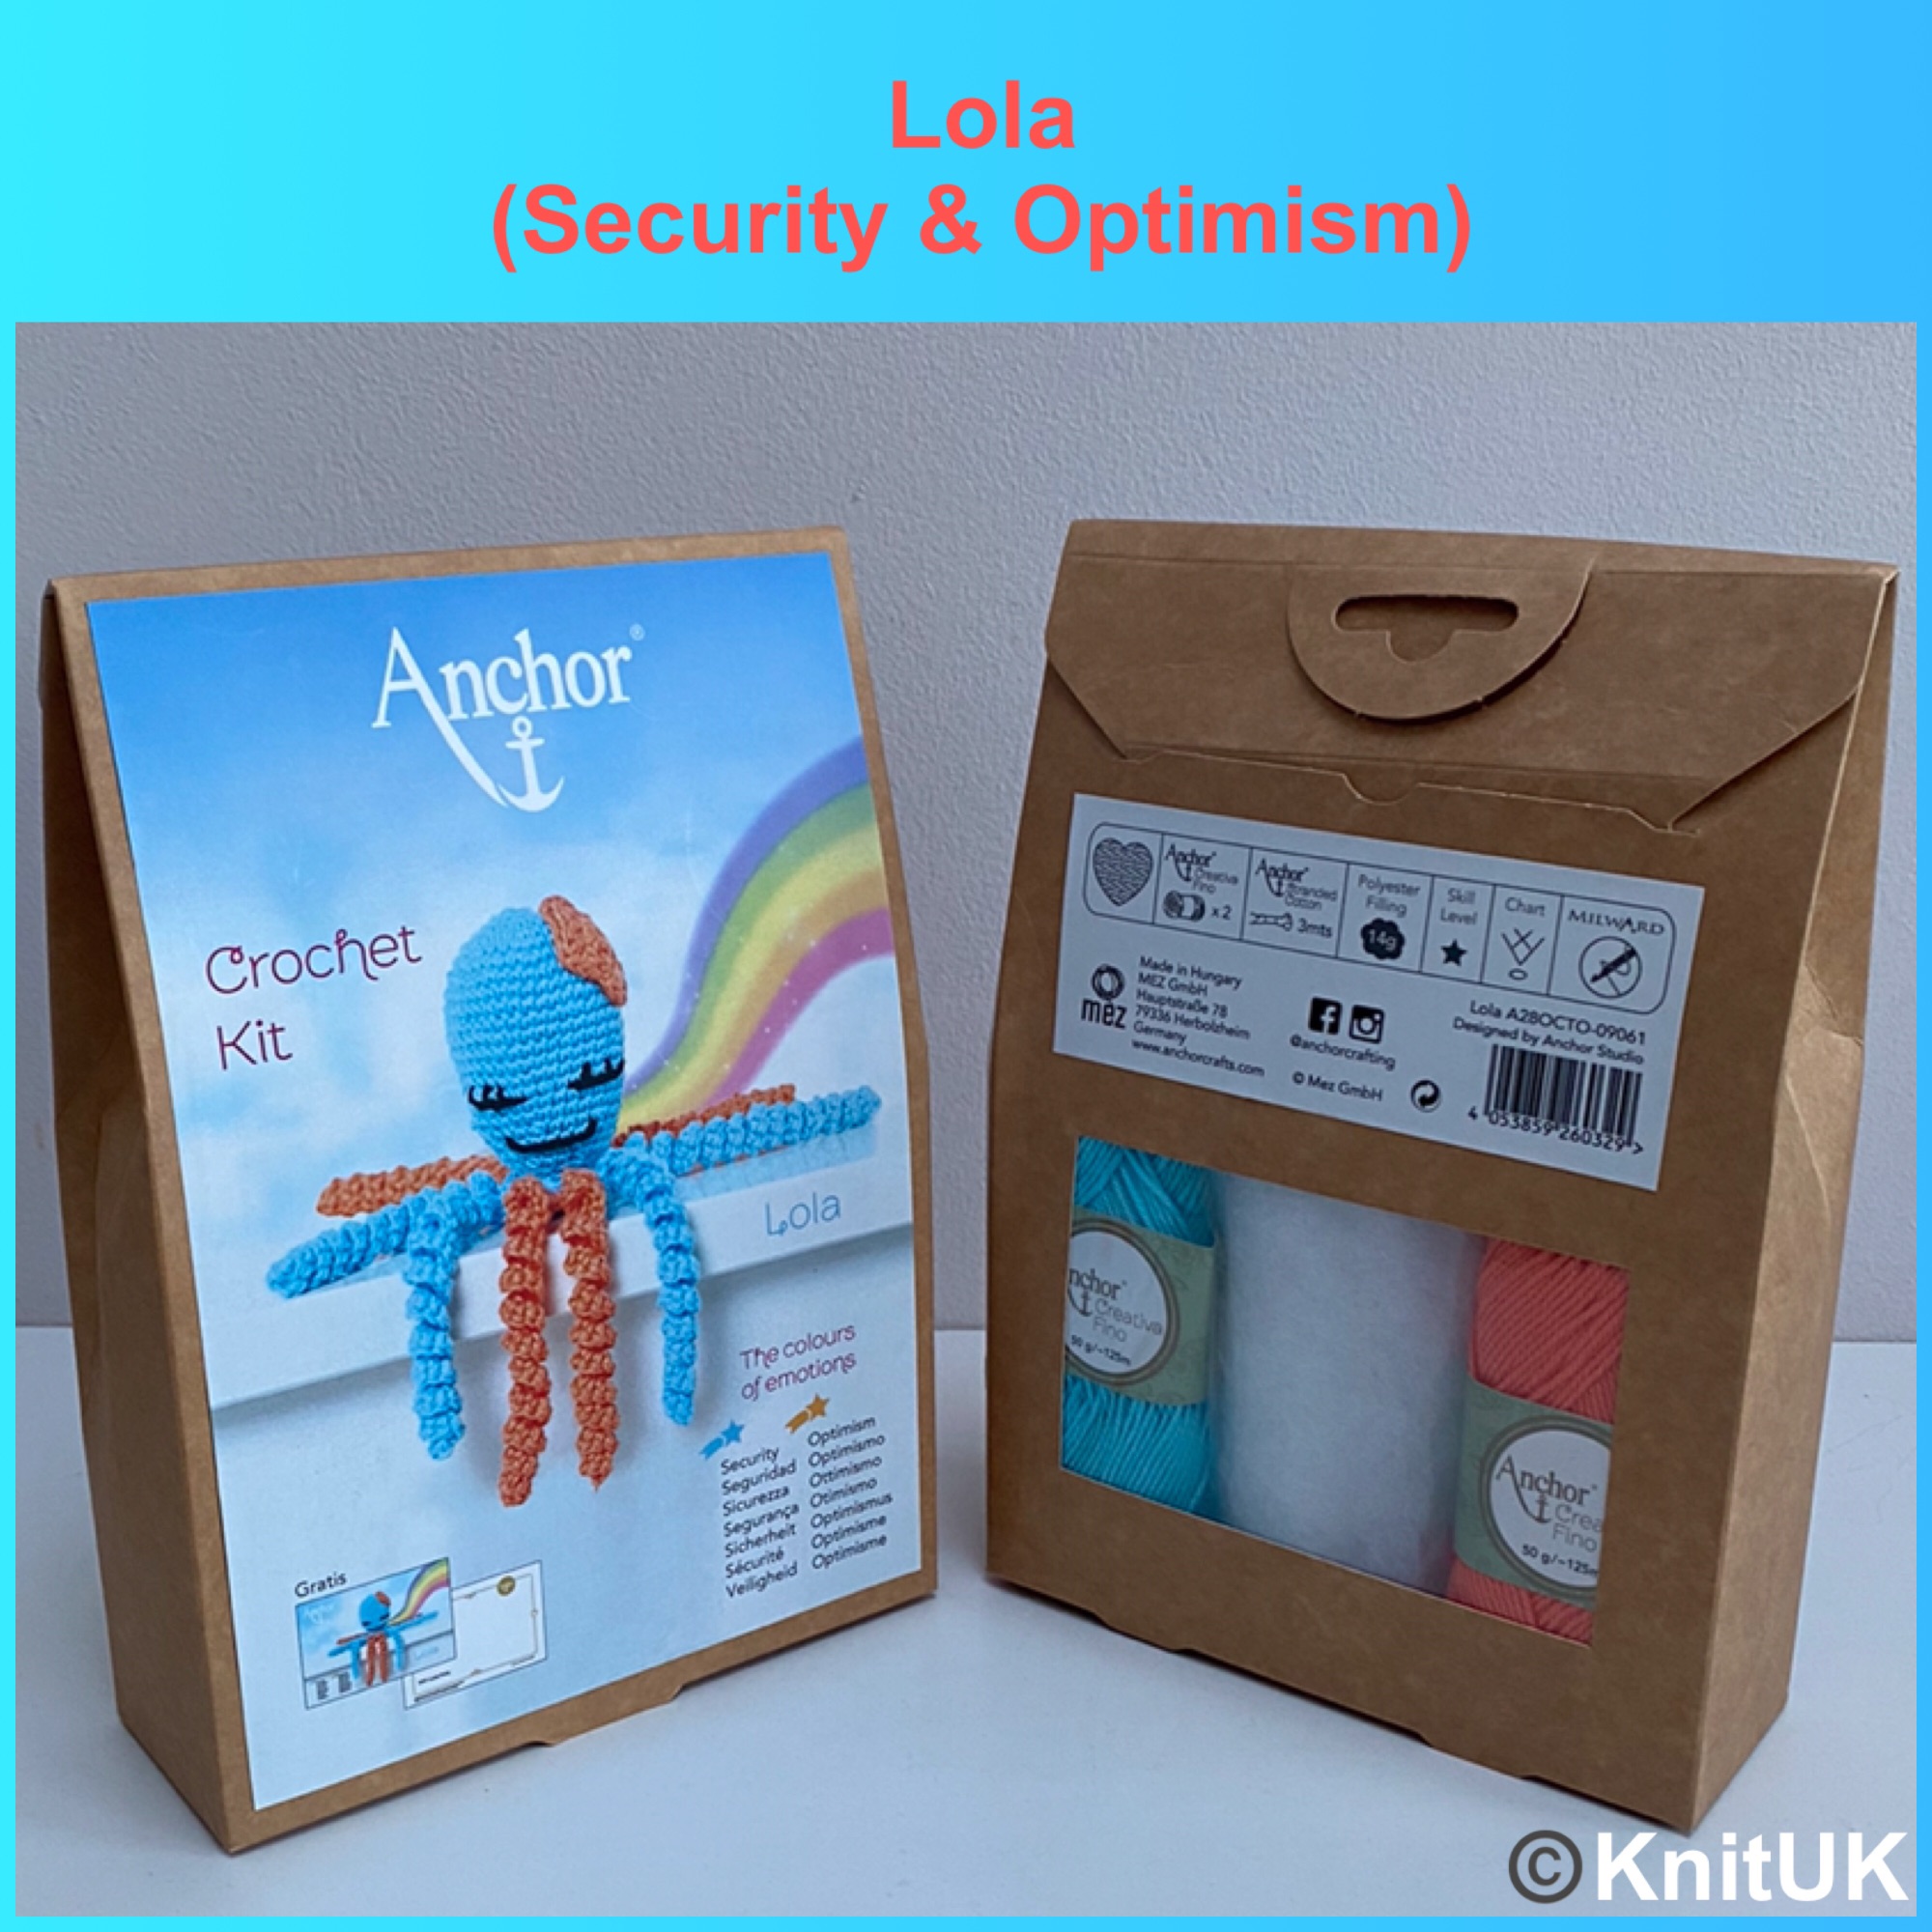 Anchor crochet kit octopus Lola the colours of emotions security optimism w